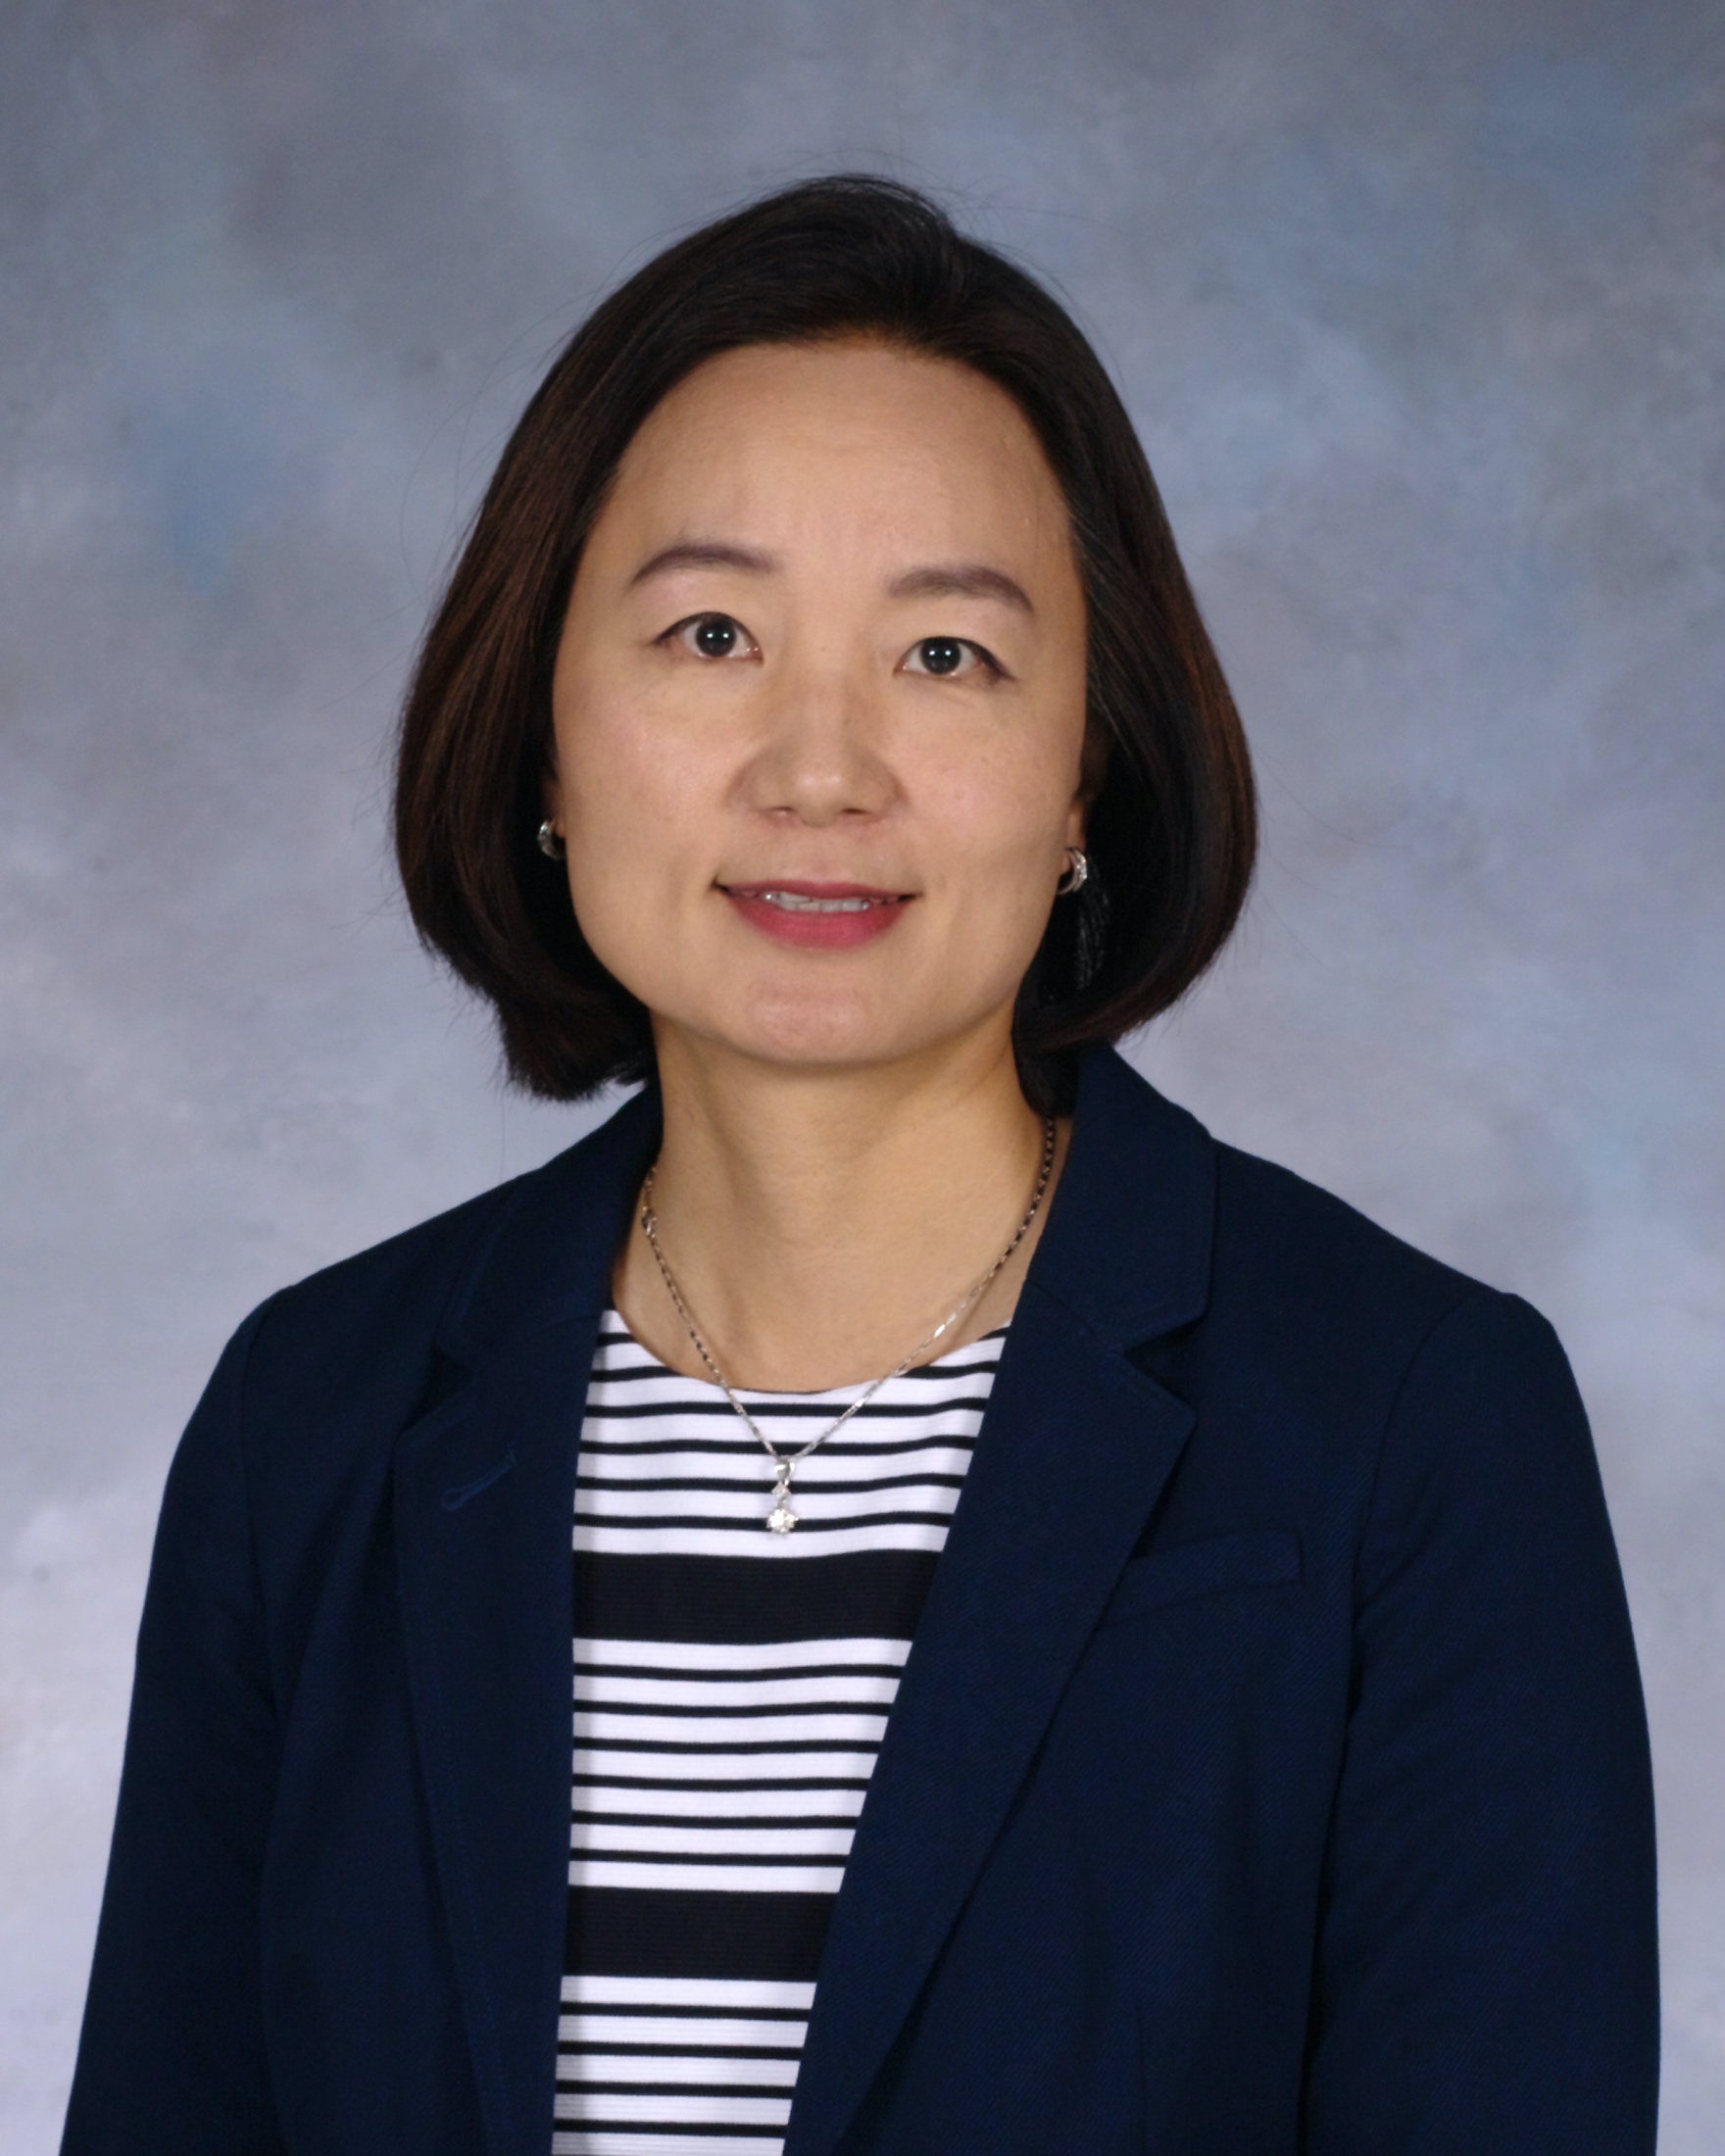 Dr. Mina Lee, Associate Provost for Educational Technology